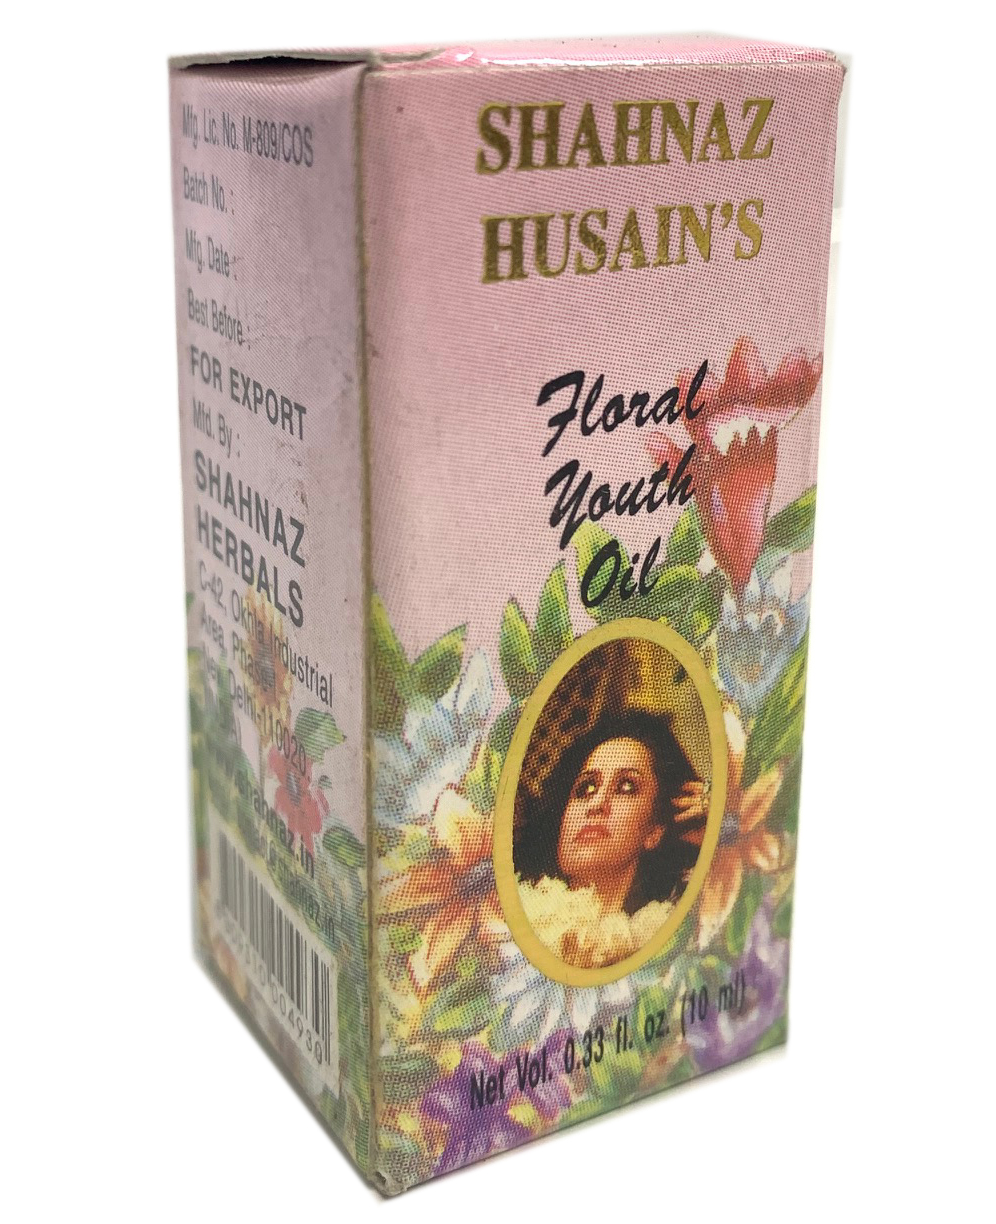 Shahnaz Husain Floral Youth Oil Aroma Therapy 10ml